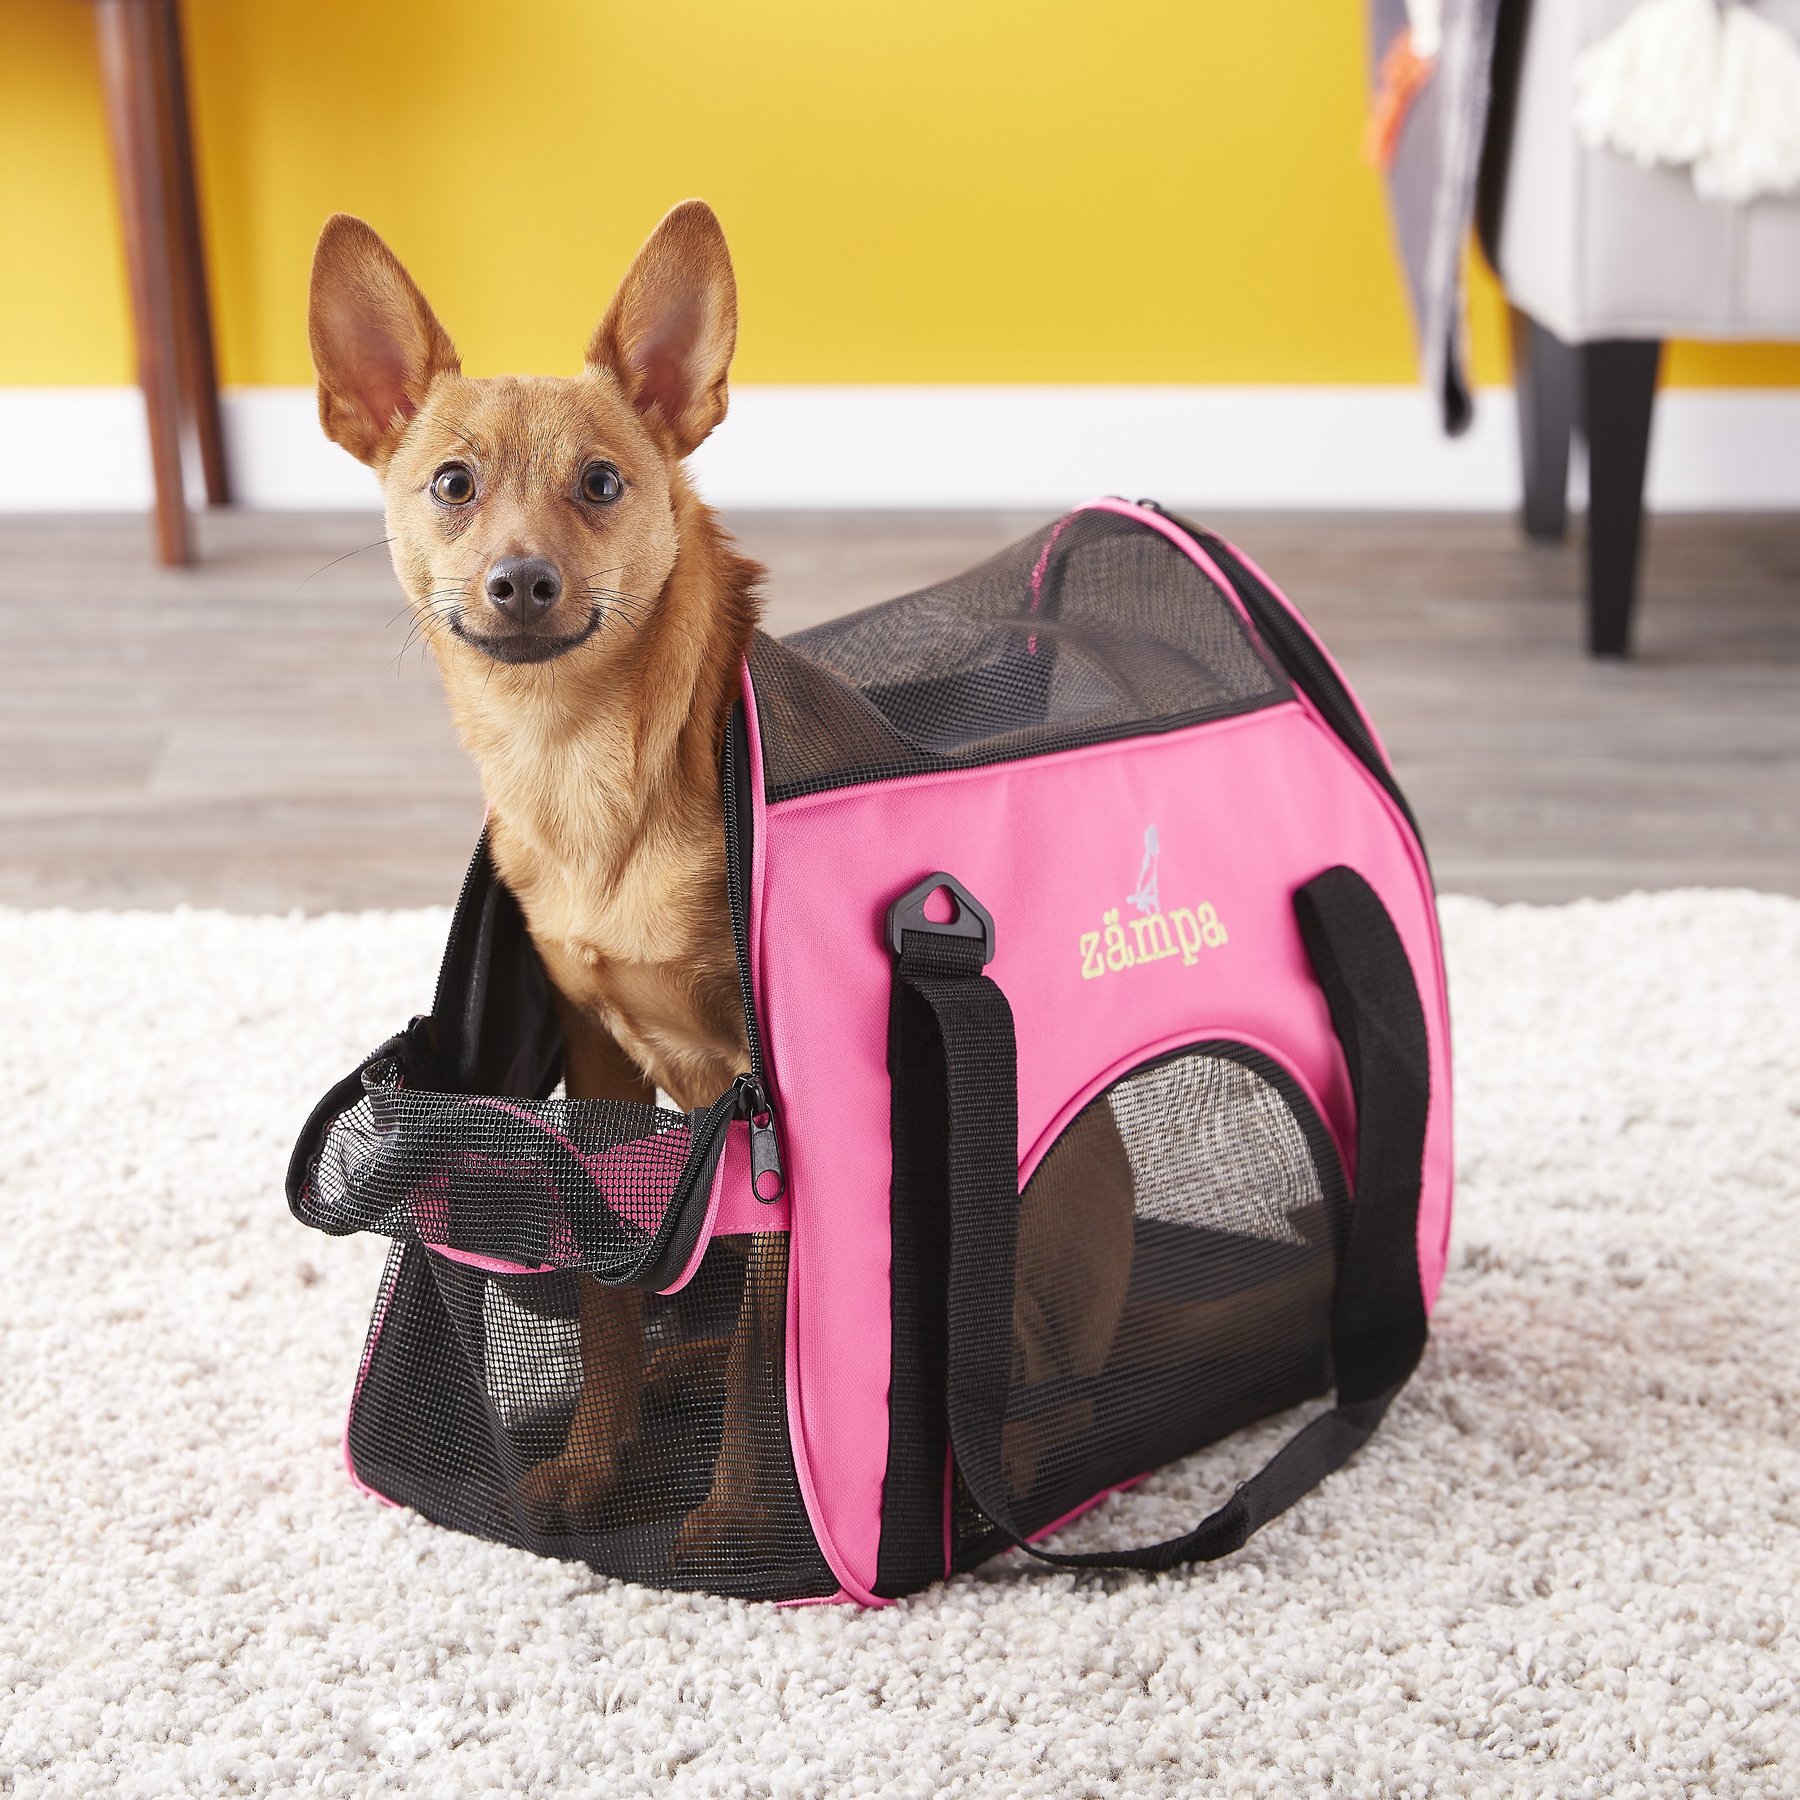 Petami Premium Airline Approved Soft-Sided Pet Travel Carrier | Ventilated, Comfortable Design with Safety Features | Ideal for